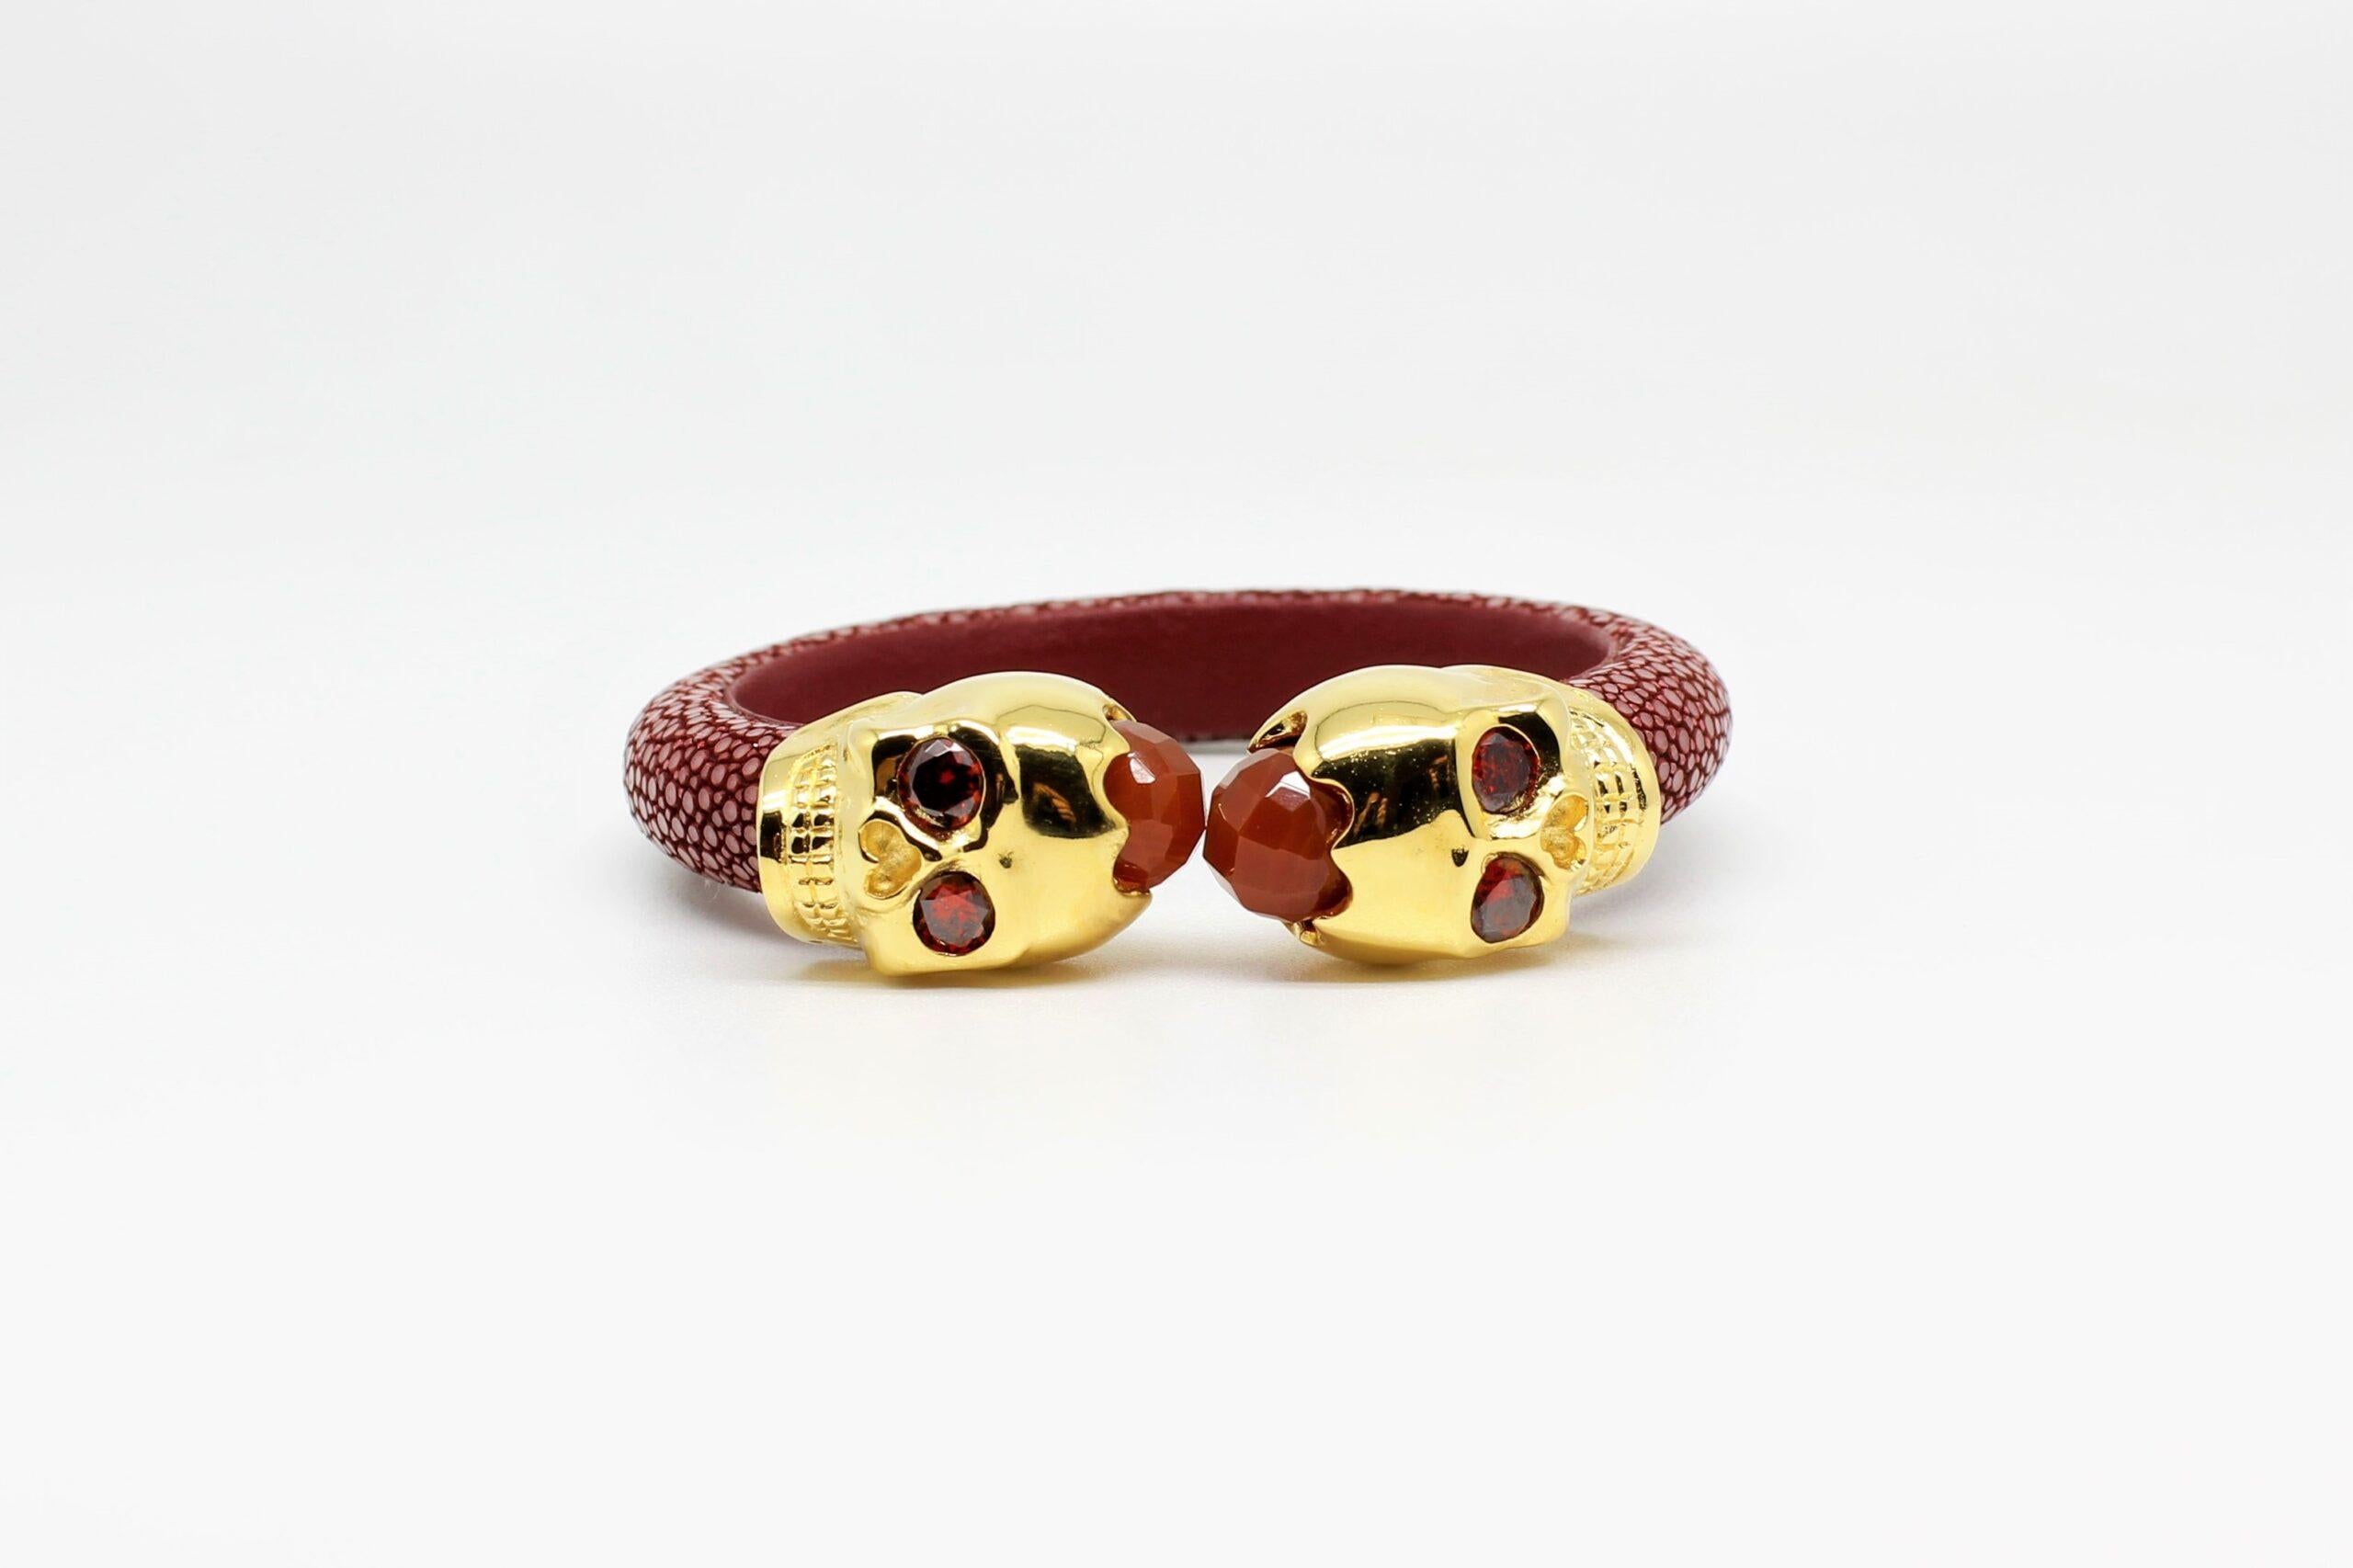 Maroon Galuchat Skin Bangle Bracelet with Skull Gold-Plated and Coral Stones by Ninety, Spain. 
Galuchat or Shagreen, skin of the stingray, became famous in Europe during the reign of Louis XV. 
Originally used as veneer on a variety of courtly